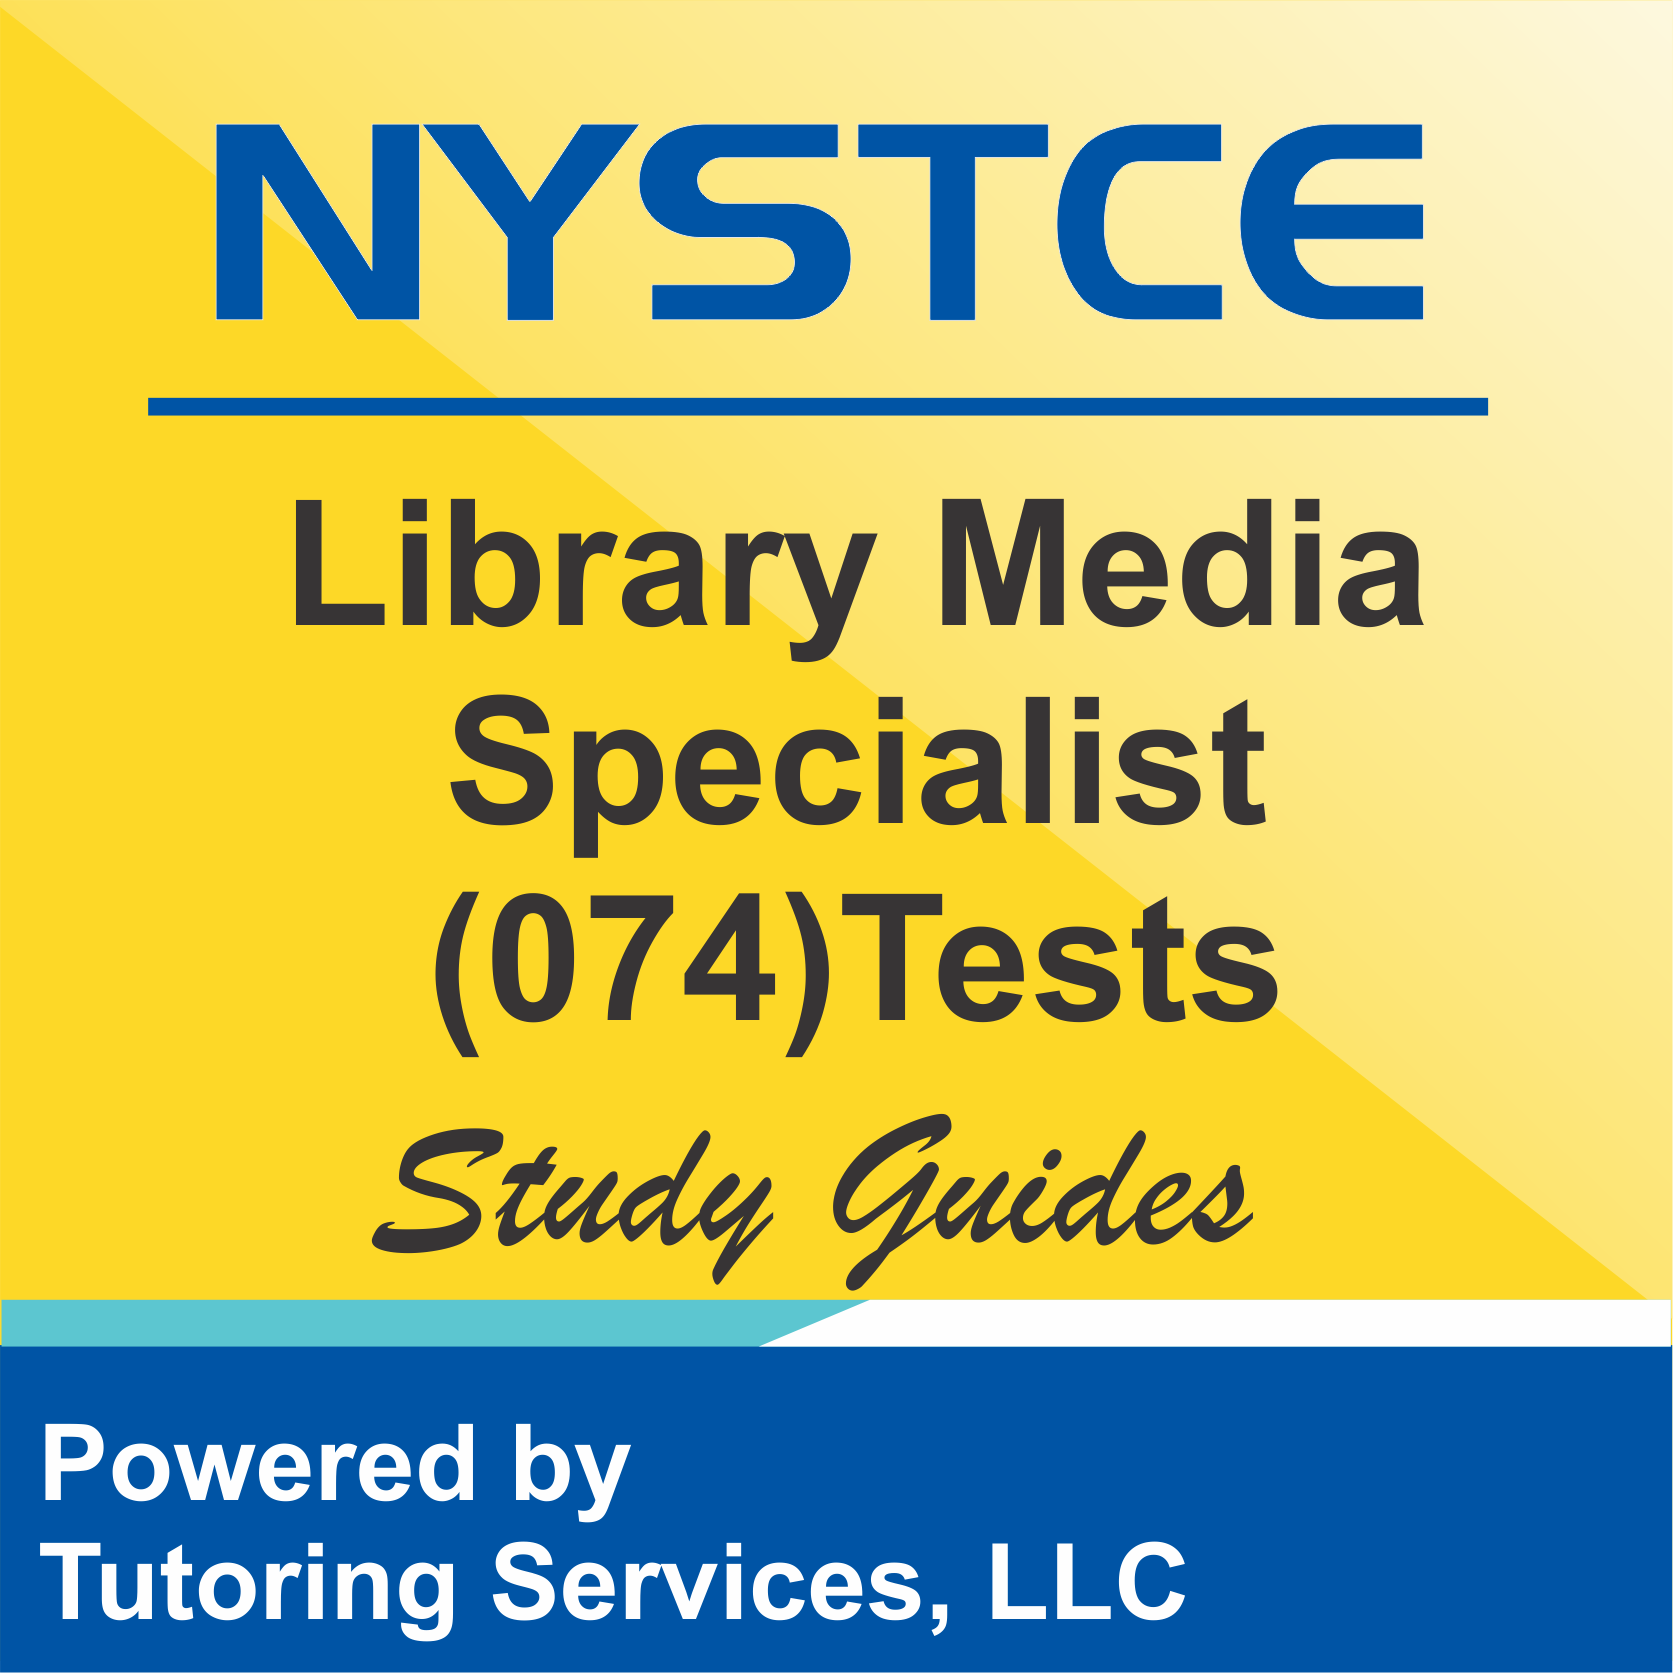 NYSTCE New York State Test Information for Library Media Specialist 074